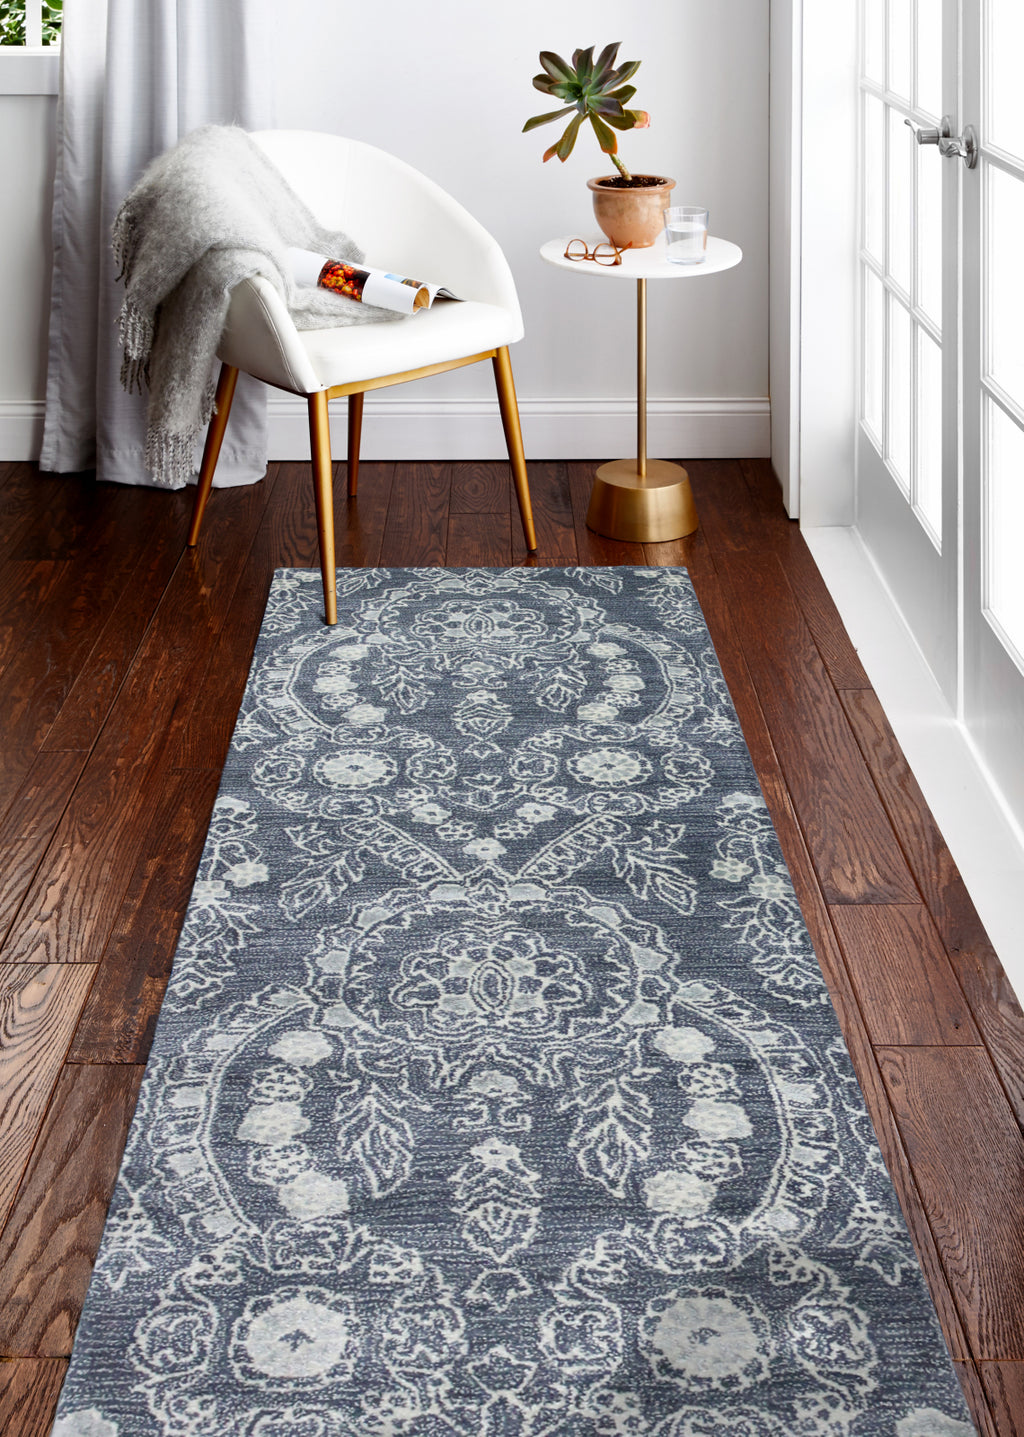 Bashian Greenwich R129-HG366 Area Rug Lifestyle Image Feature